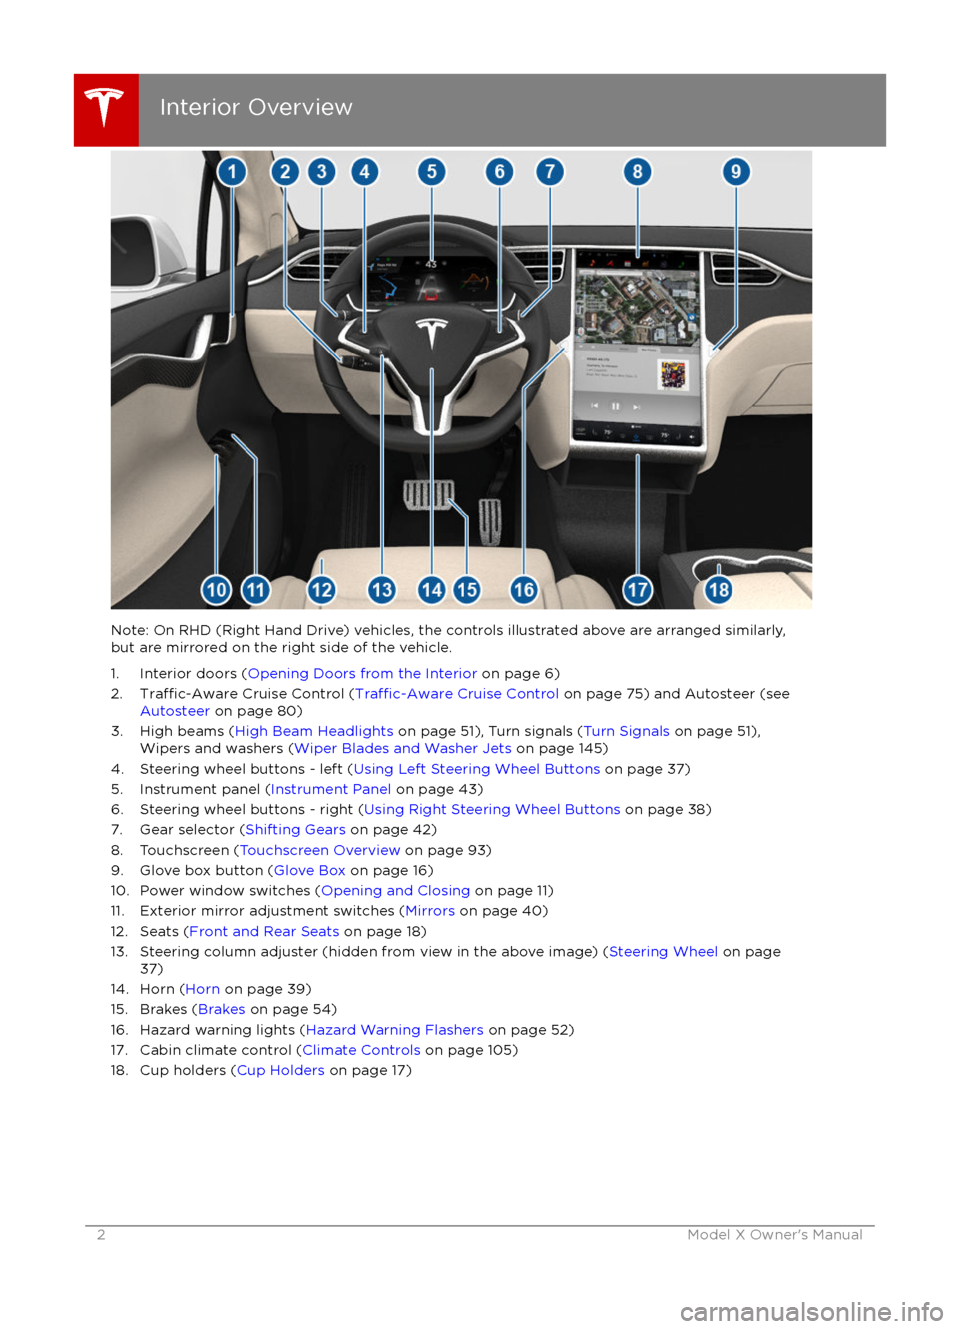 TESLA MODEL X 2016   Owners Manual Note: On RHD (Right Hand Drive) vehicles, the controls illustrated above are arranged similarly,but are mirrored on the right side of the vehicle.
1. Interior doors ( Opening Doors from the Interior  